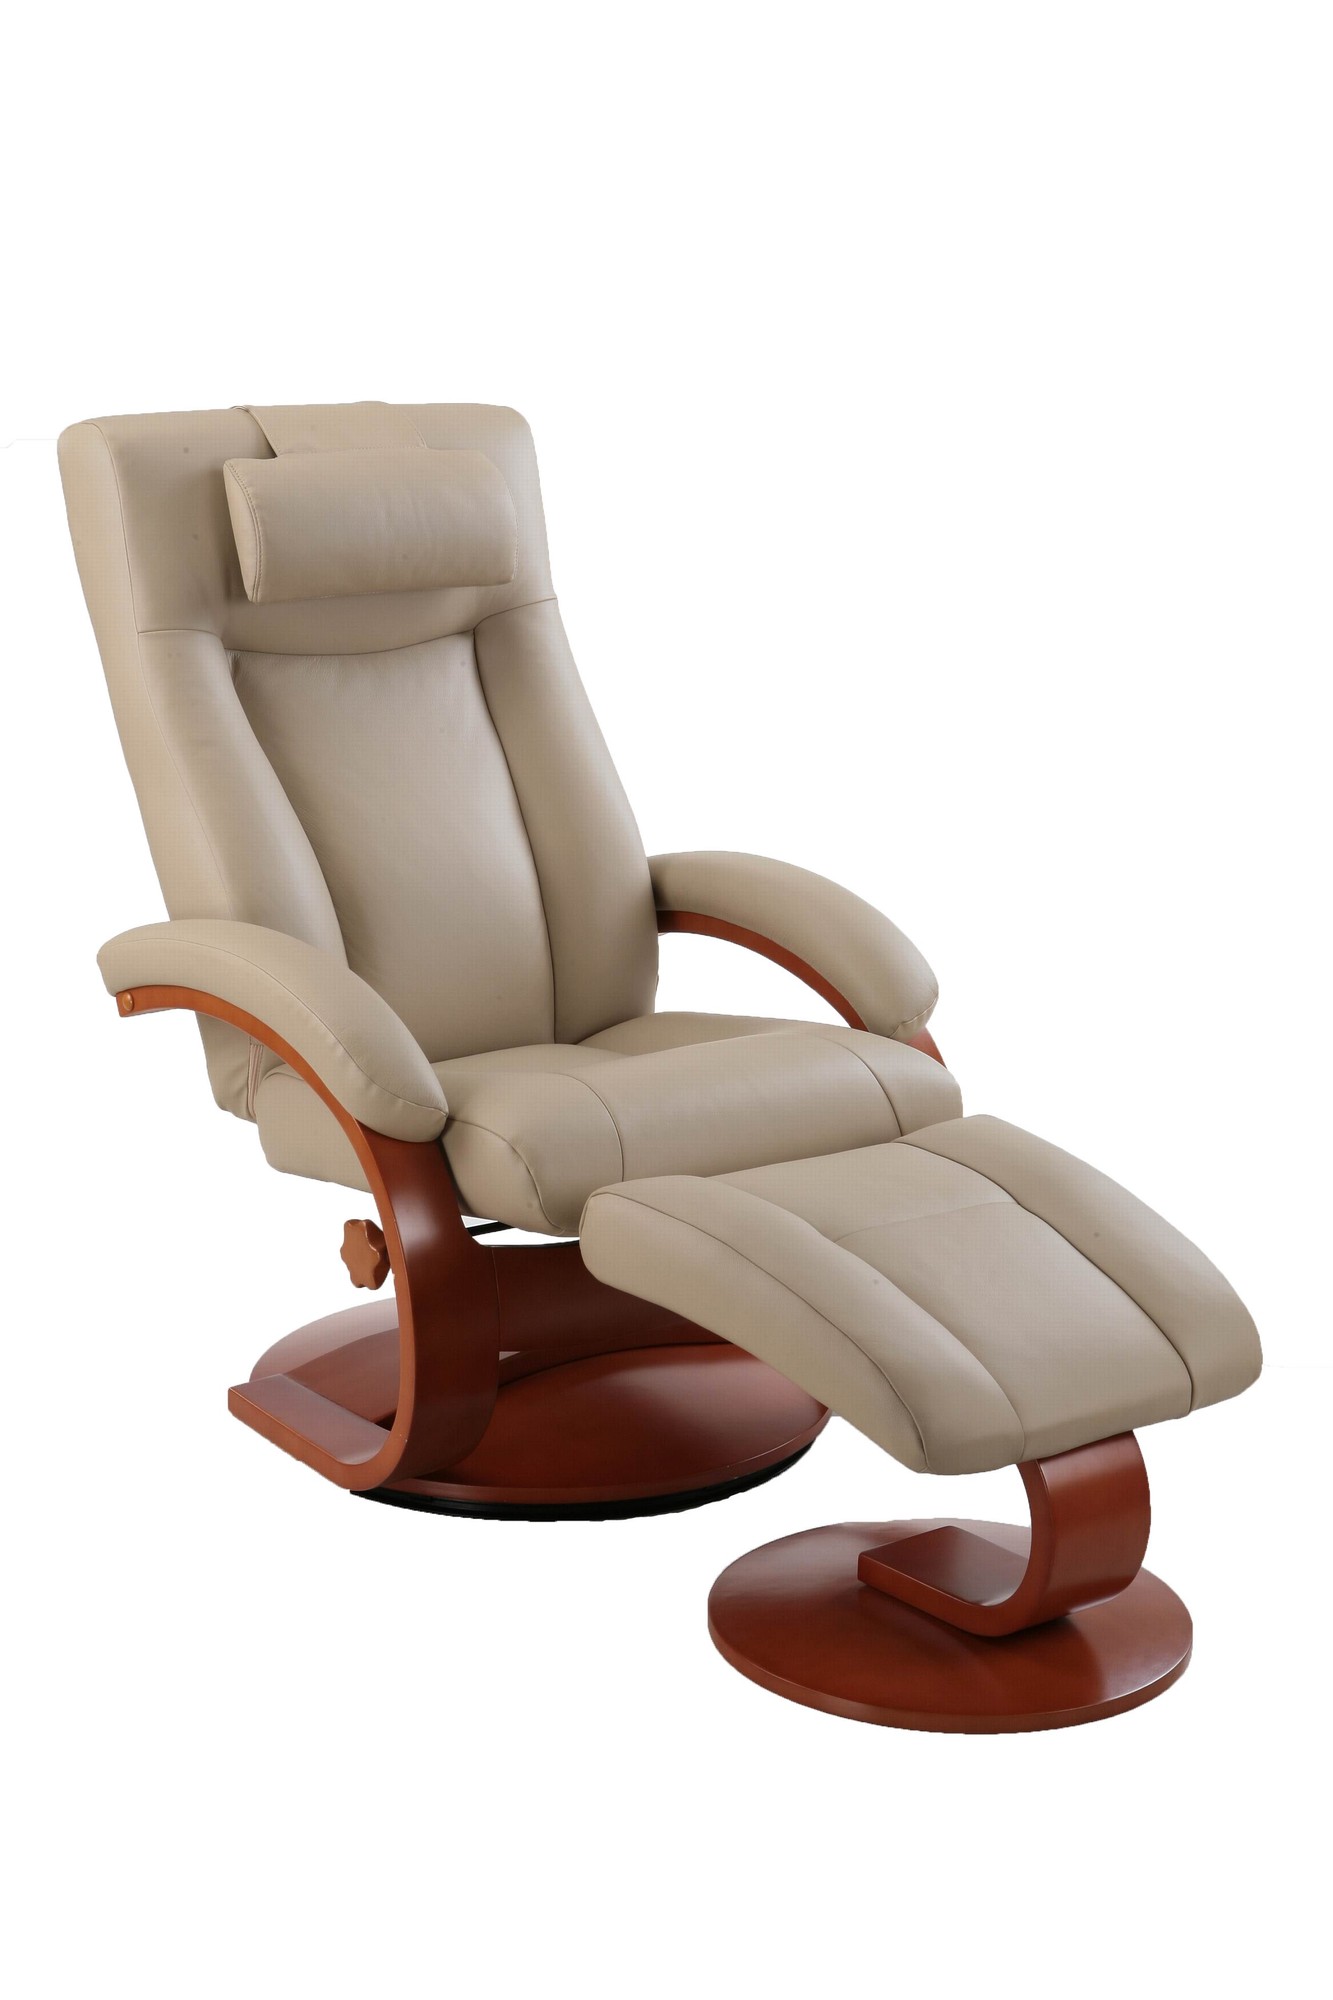 Cobblestone Tan Top Grain Leather Recliner and Ottoman with Pillow